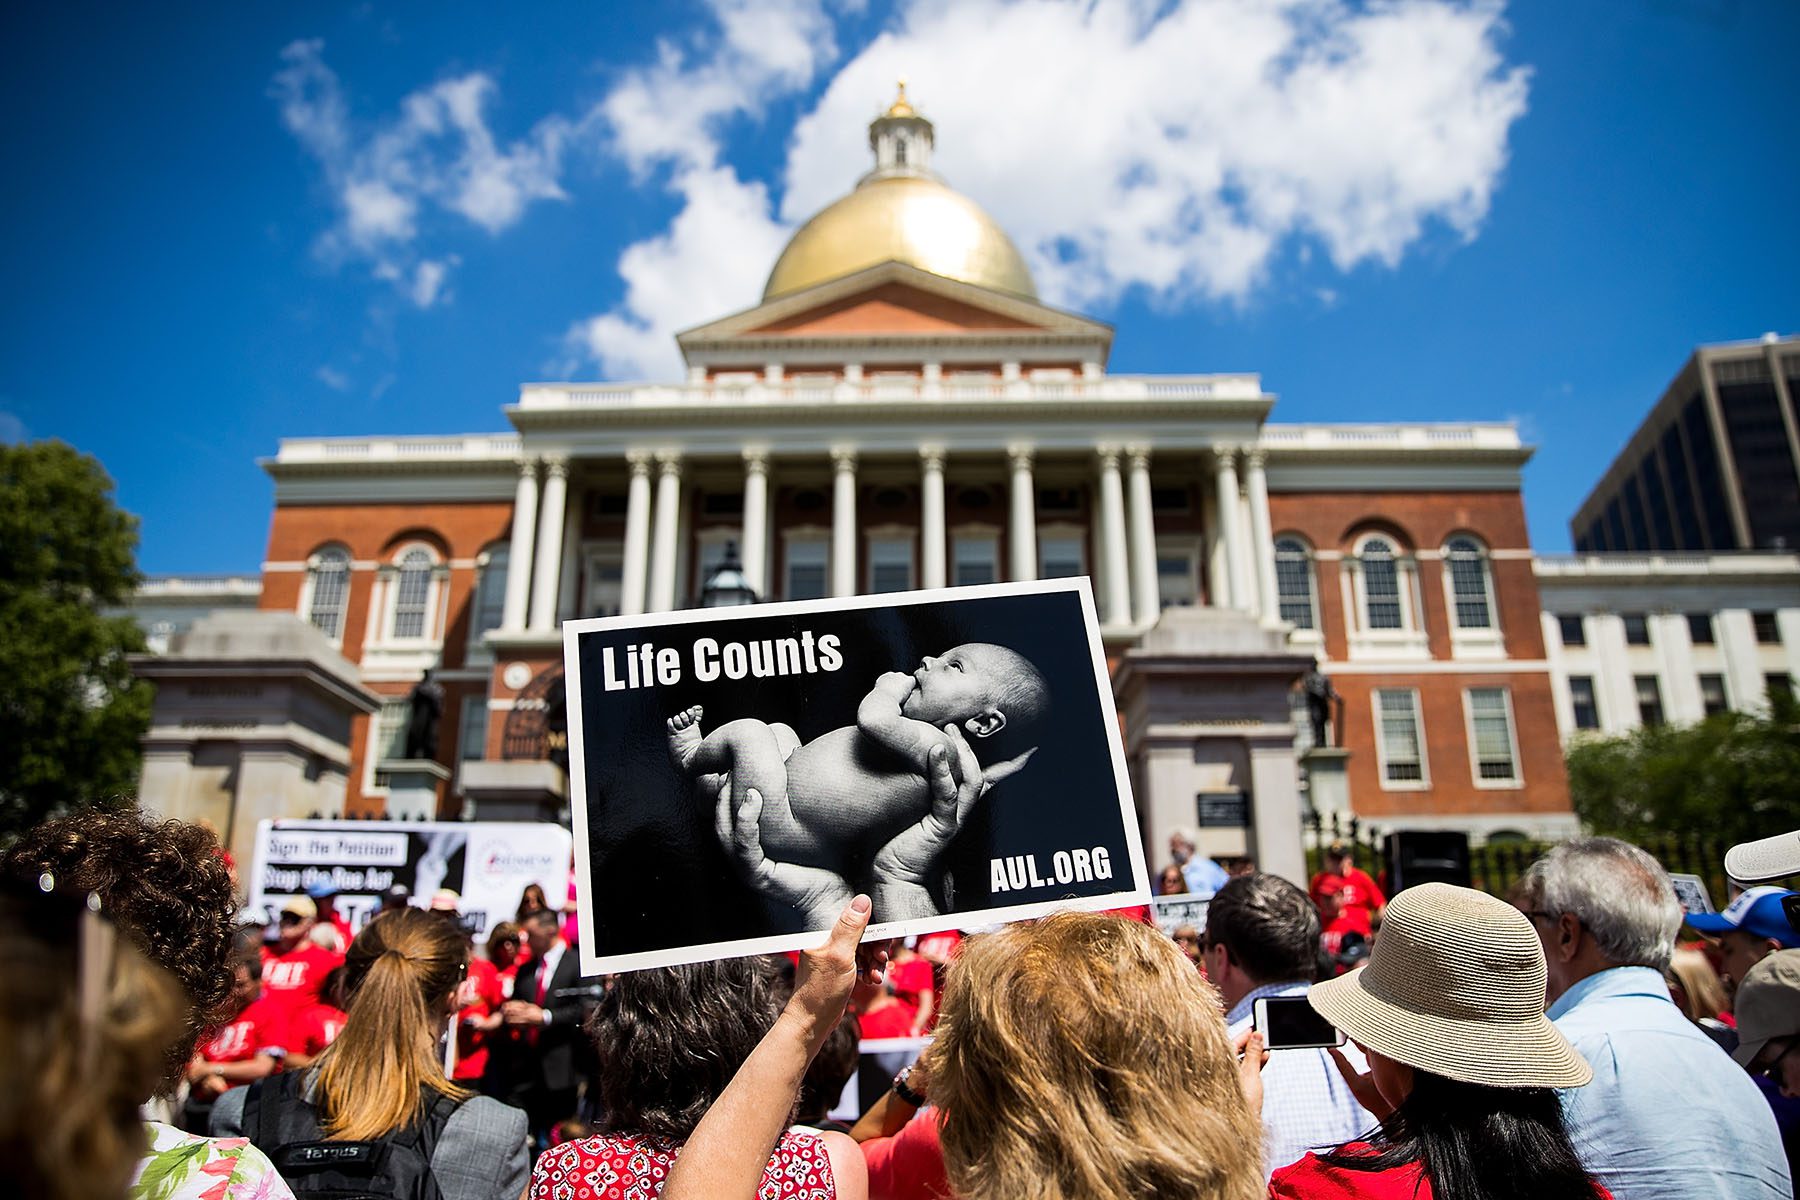 Anti-abortion demonstrators are seen in front of the Massachusetts Statehouse. In the foreground, a protester holds a signs on which an image of a baby is printed with the words "Life Counts" and "AUL.ORG"